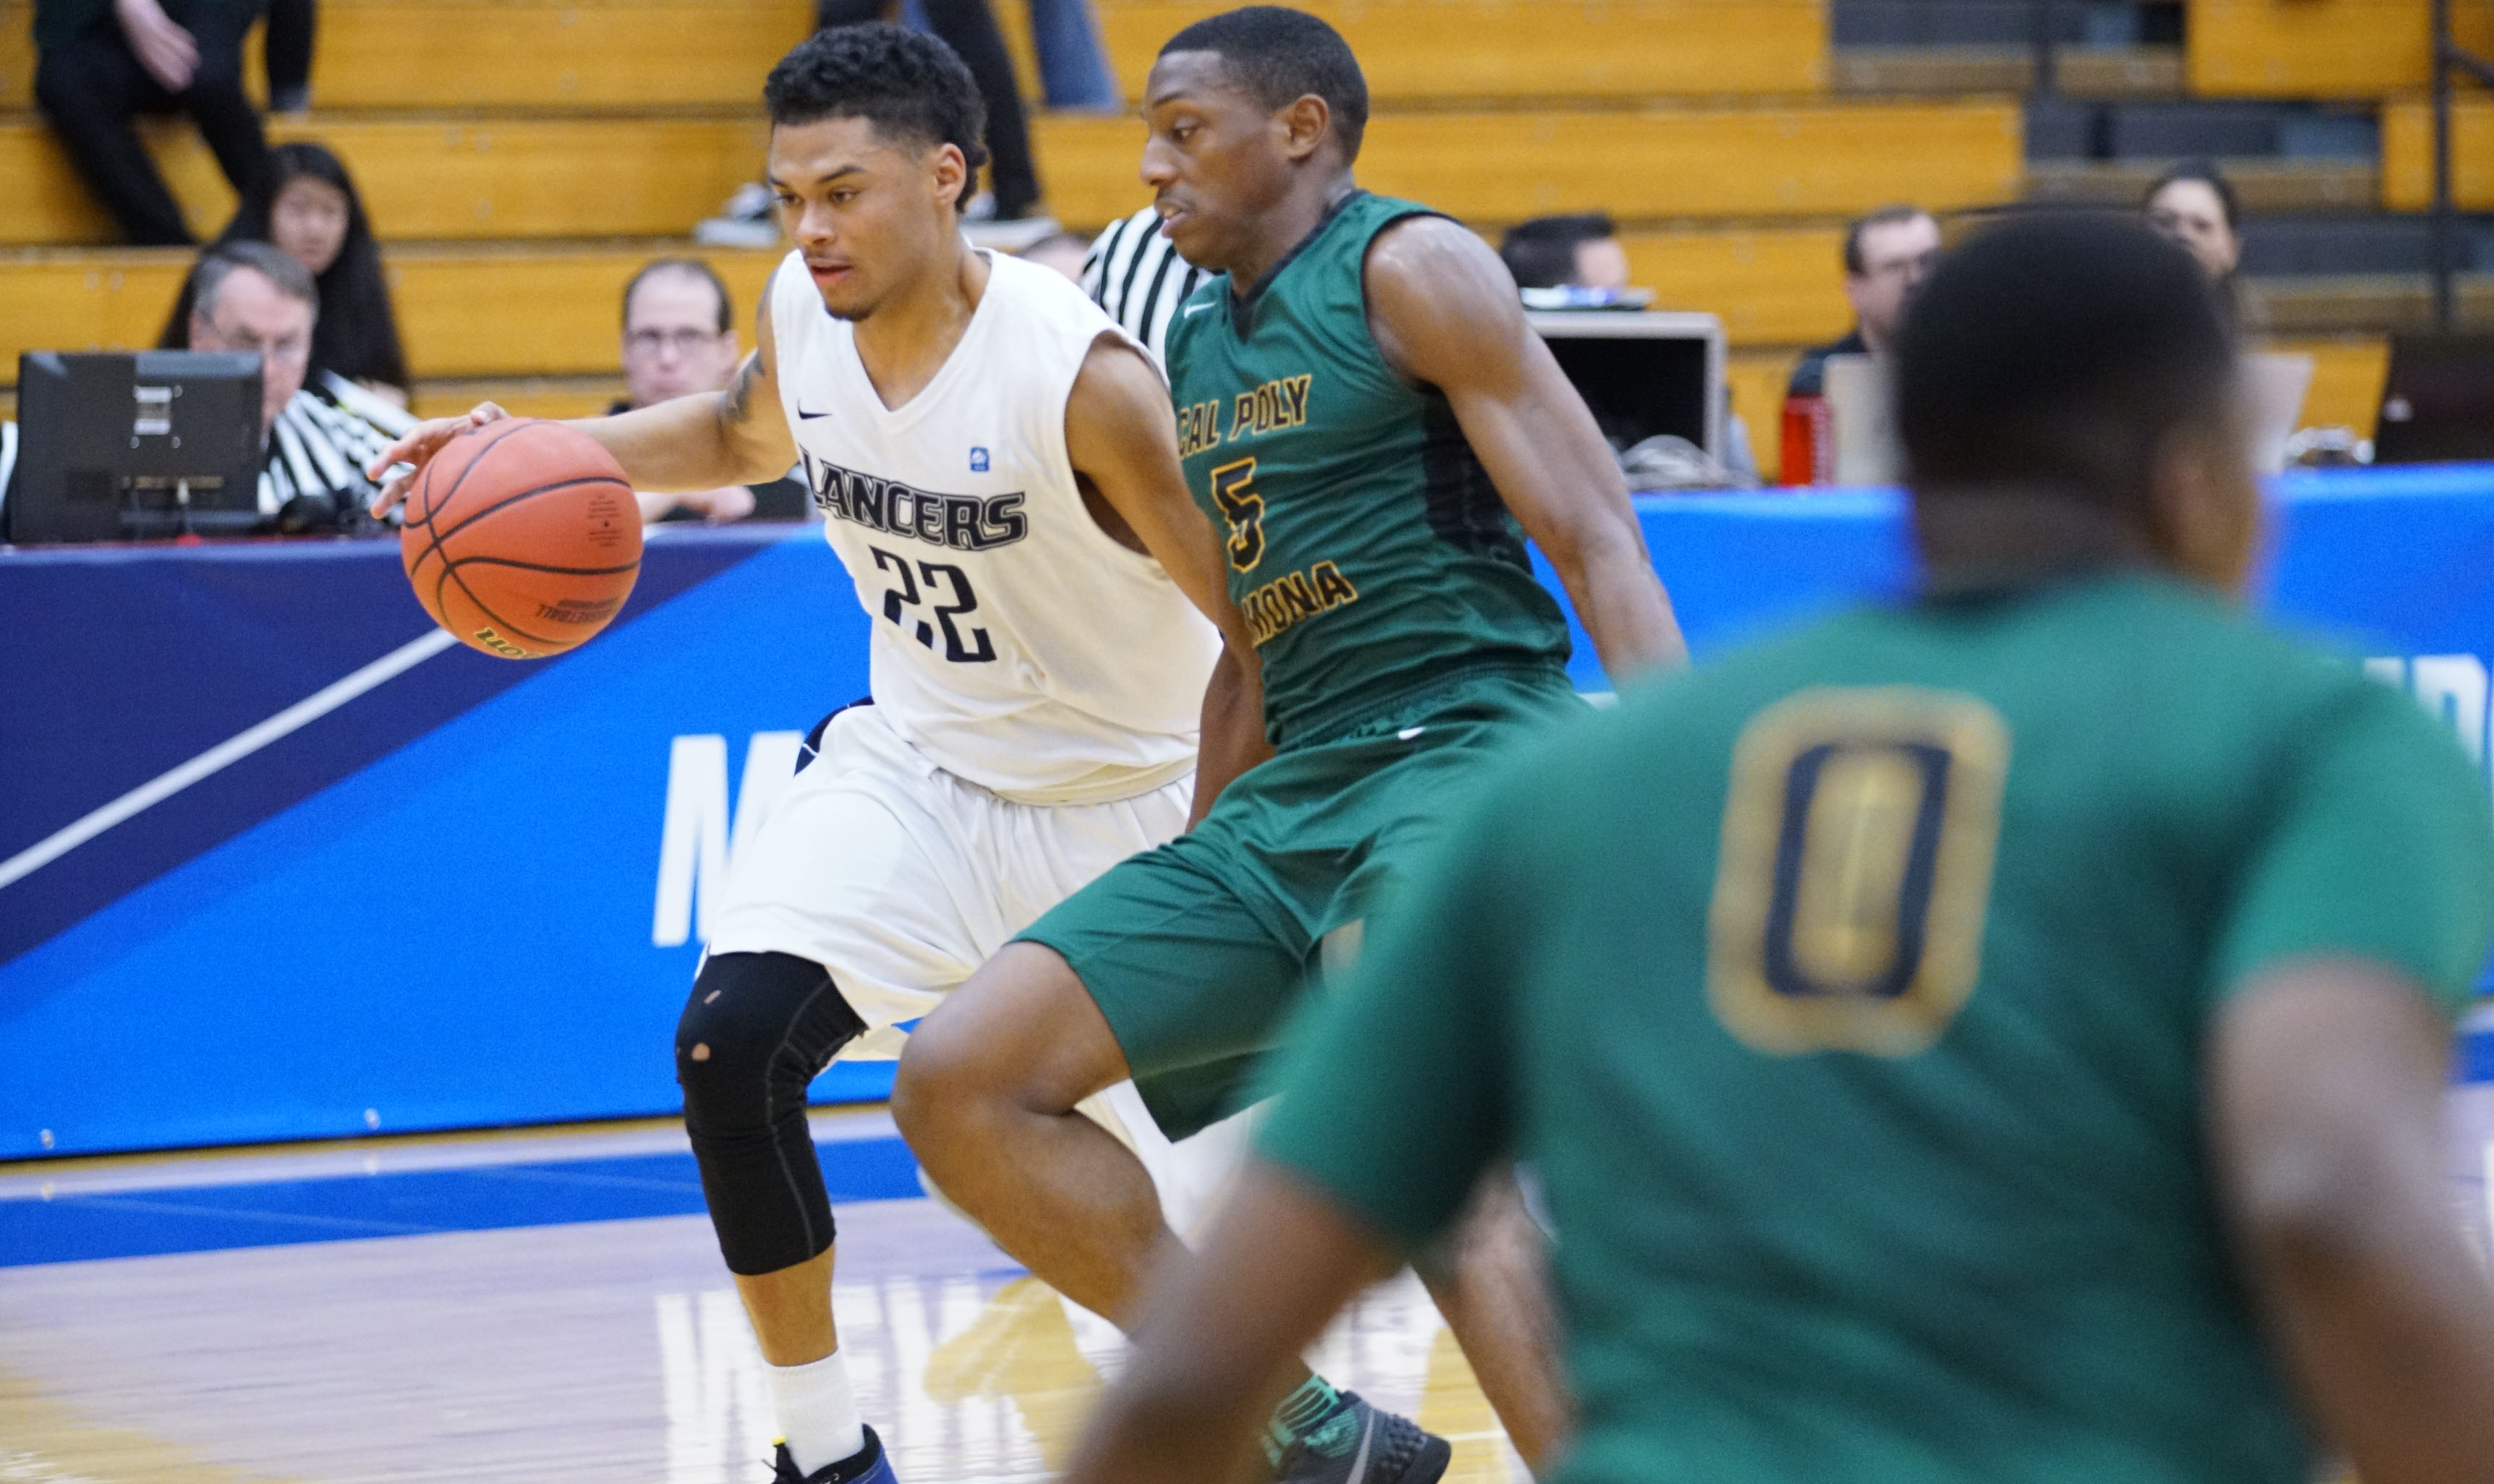 2015-16 PacWest Player of the Year Michael Smith (left) is guarded by Cal Poly Pomona's Barry Bell in Friday's NCAA tournament opener won by CBU 70-63